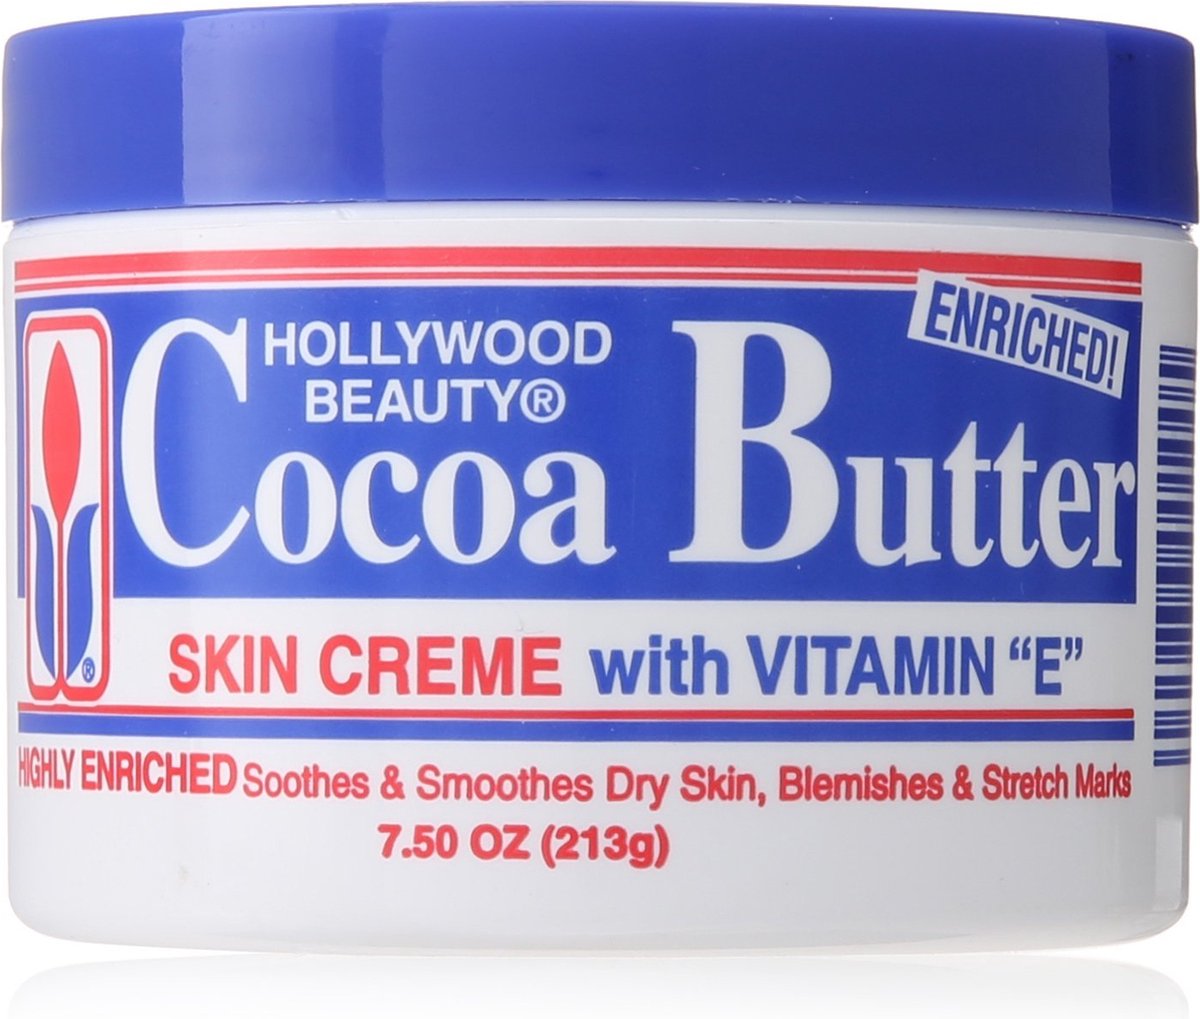 Hollywood Beauty Cocoa Butter Skin Crème with Vitamin E